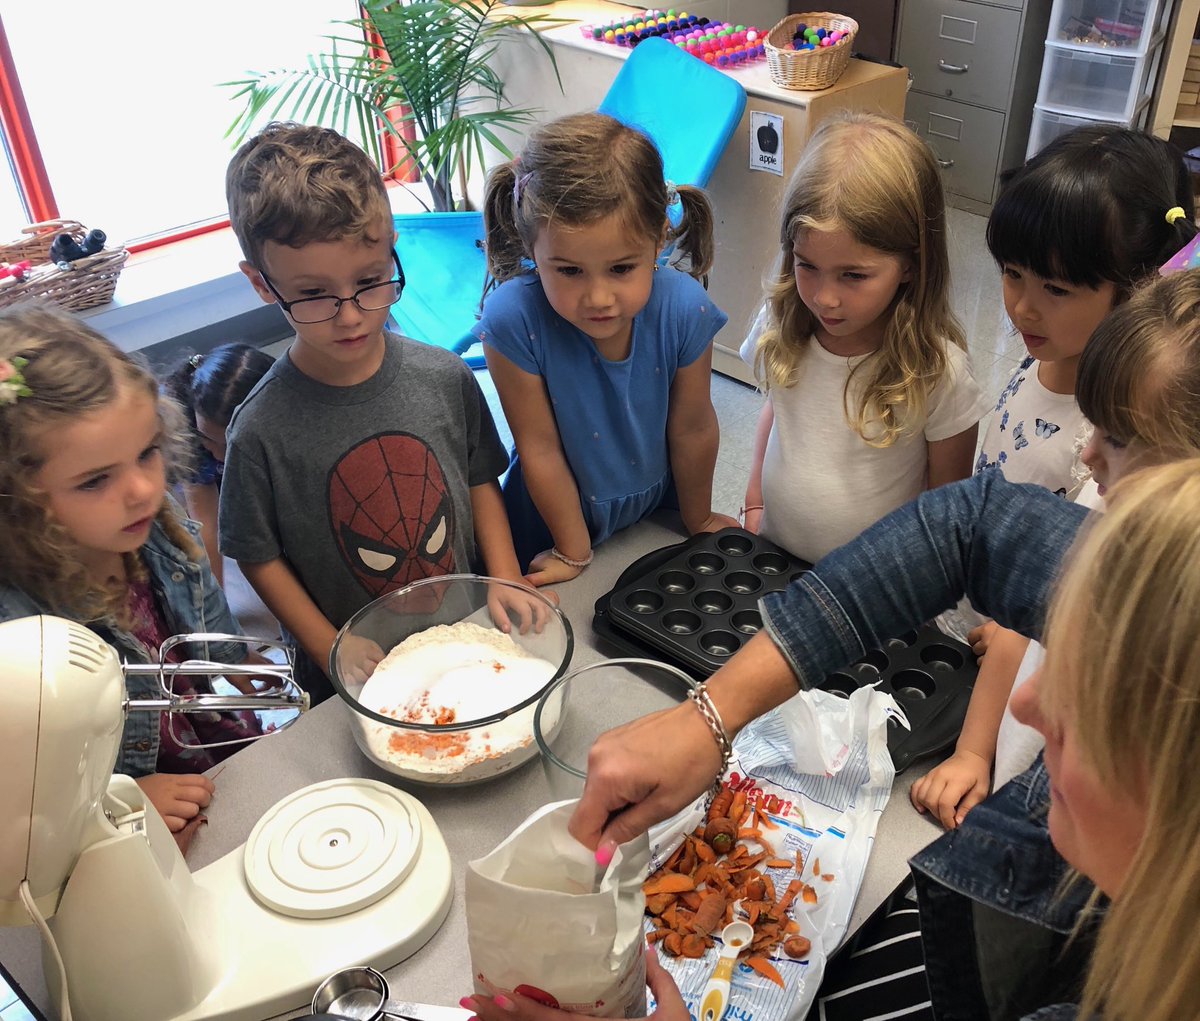 Carrot muffin Monday! Baking up a storm using the carrots from our garden. #mathisyummy #turntaking #healthysnack